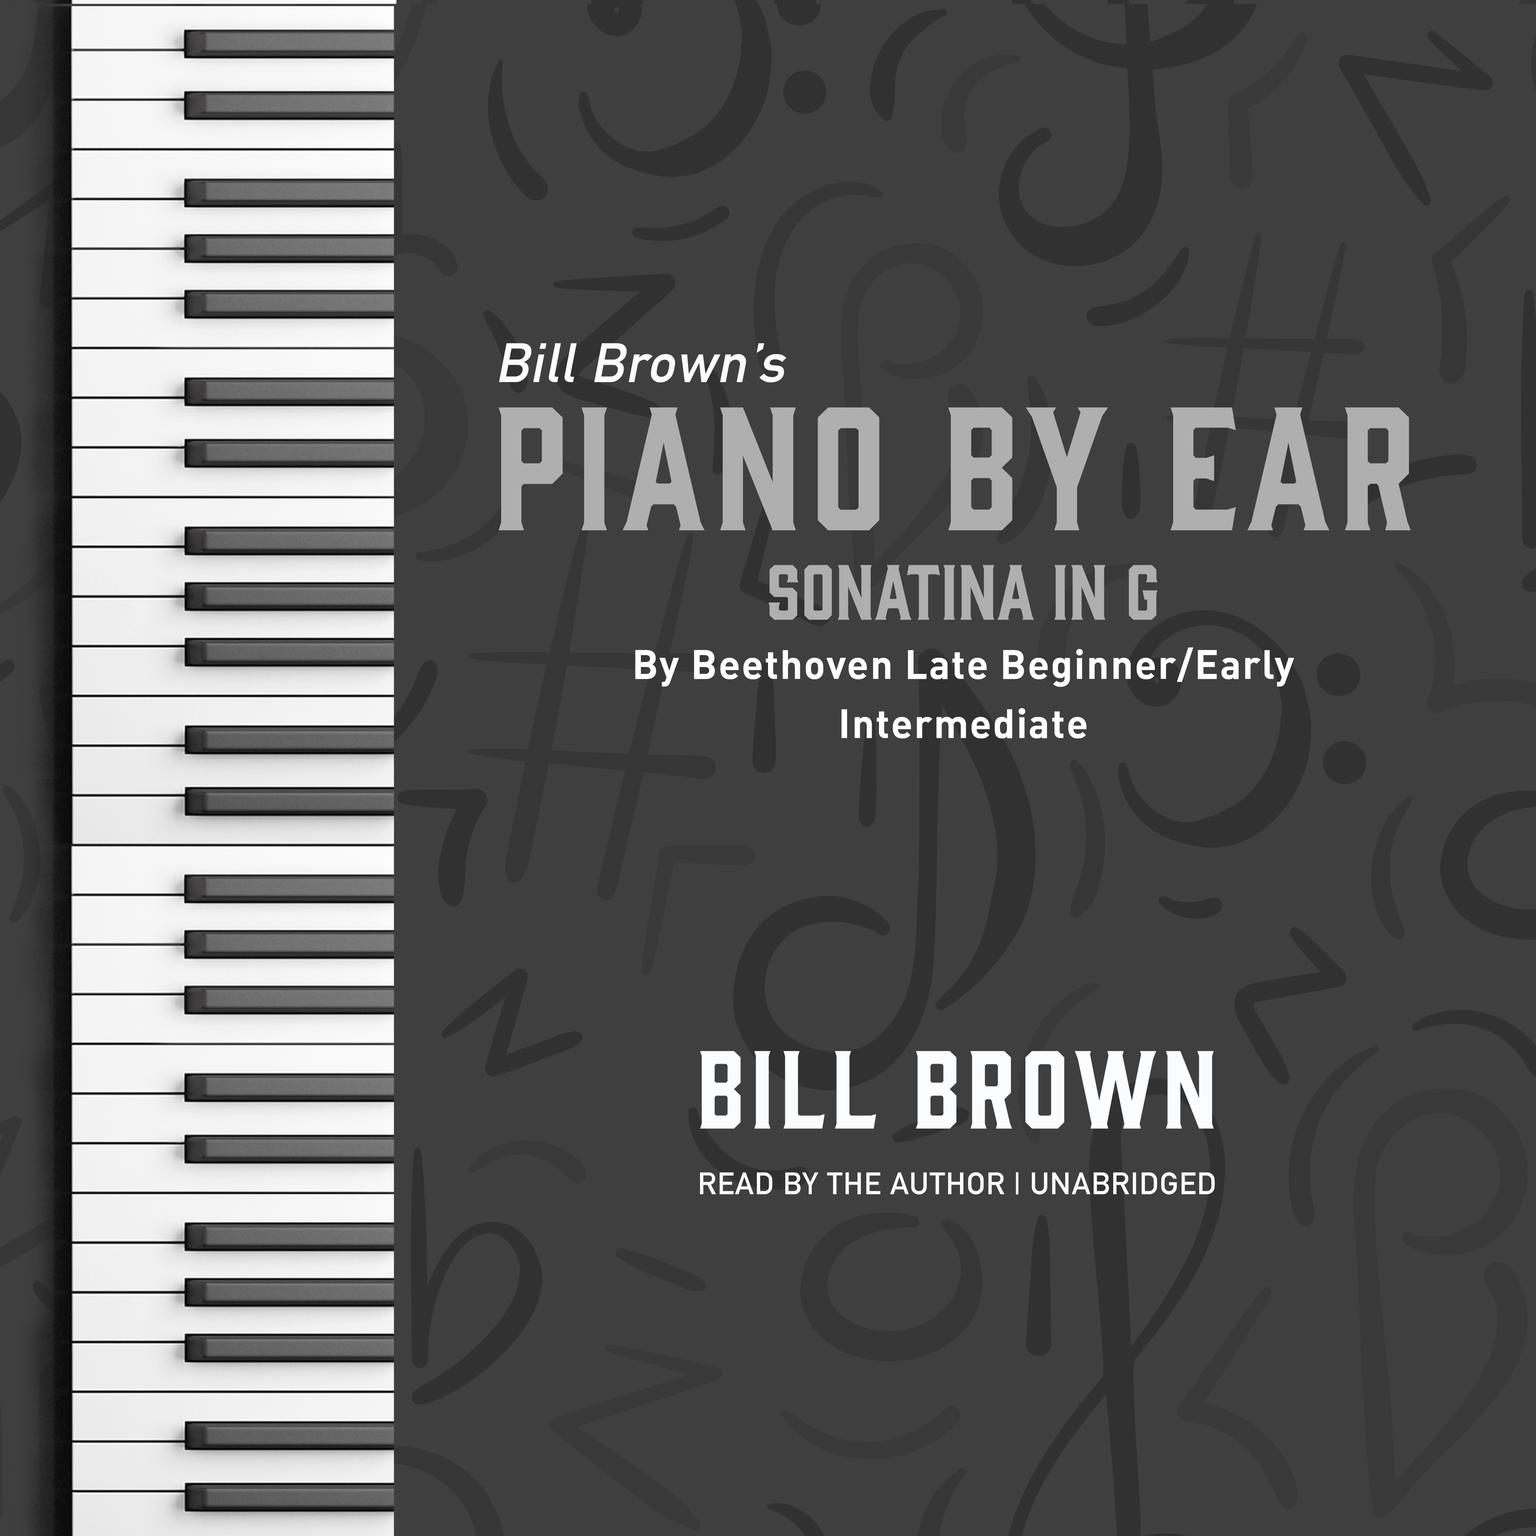 Sonatina in G: By Beethoven Late Beginner/Early Intermediate Audiobook, by Bill Brown